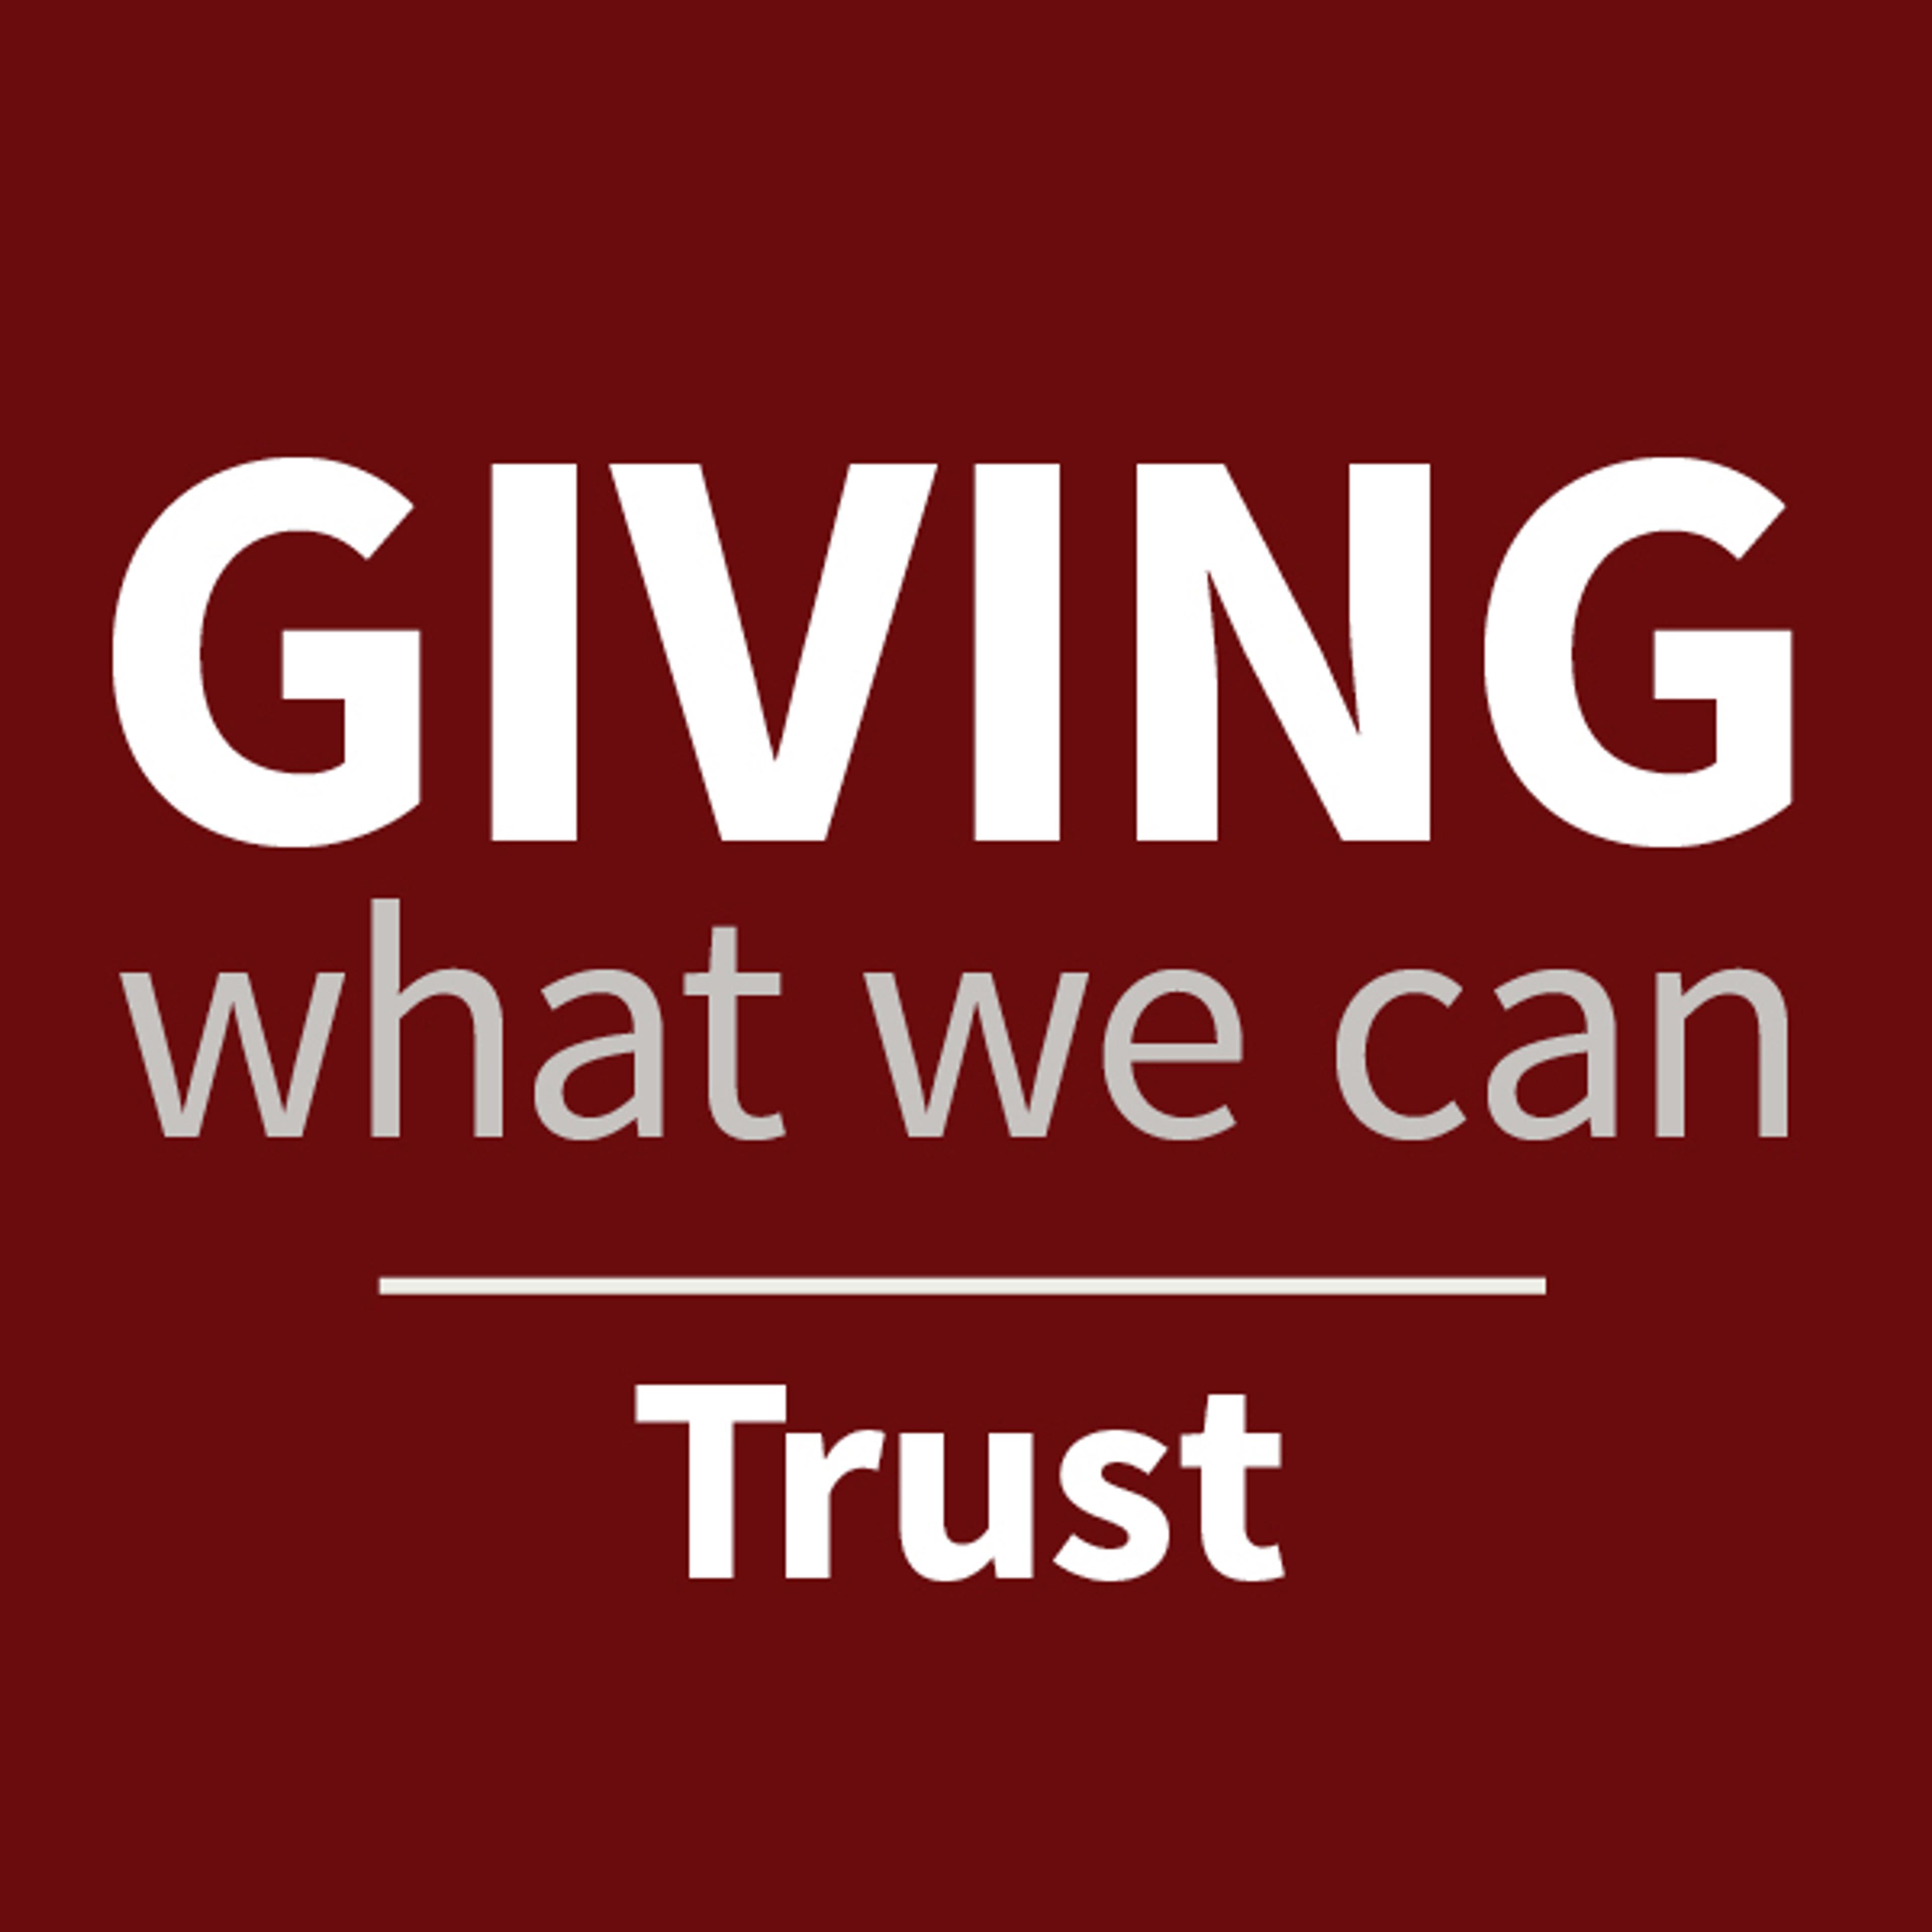 The Giving What We Can Trust